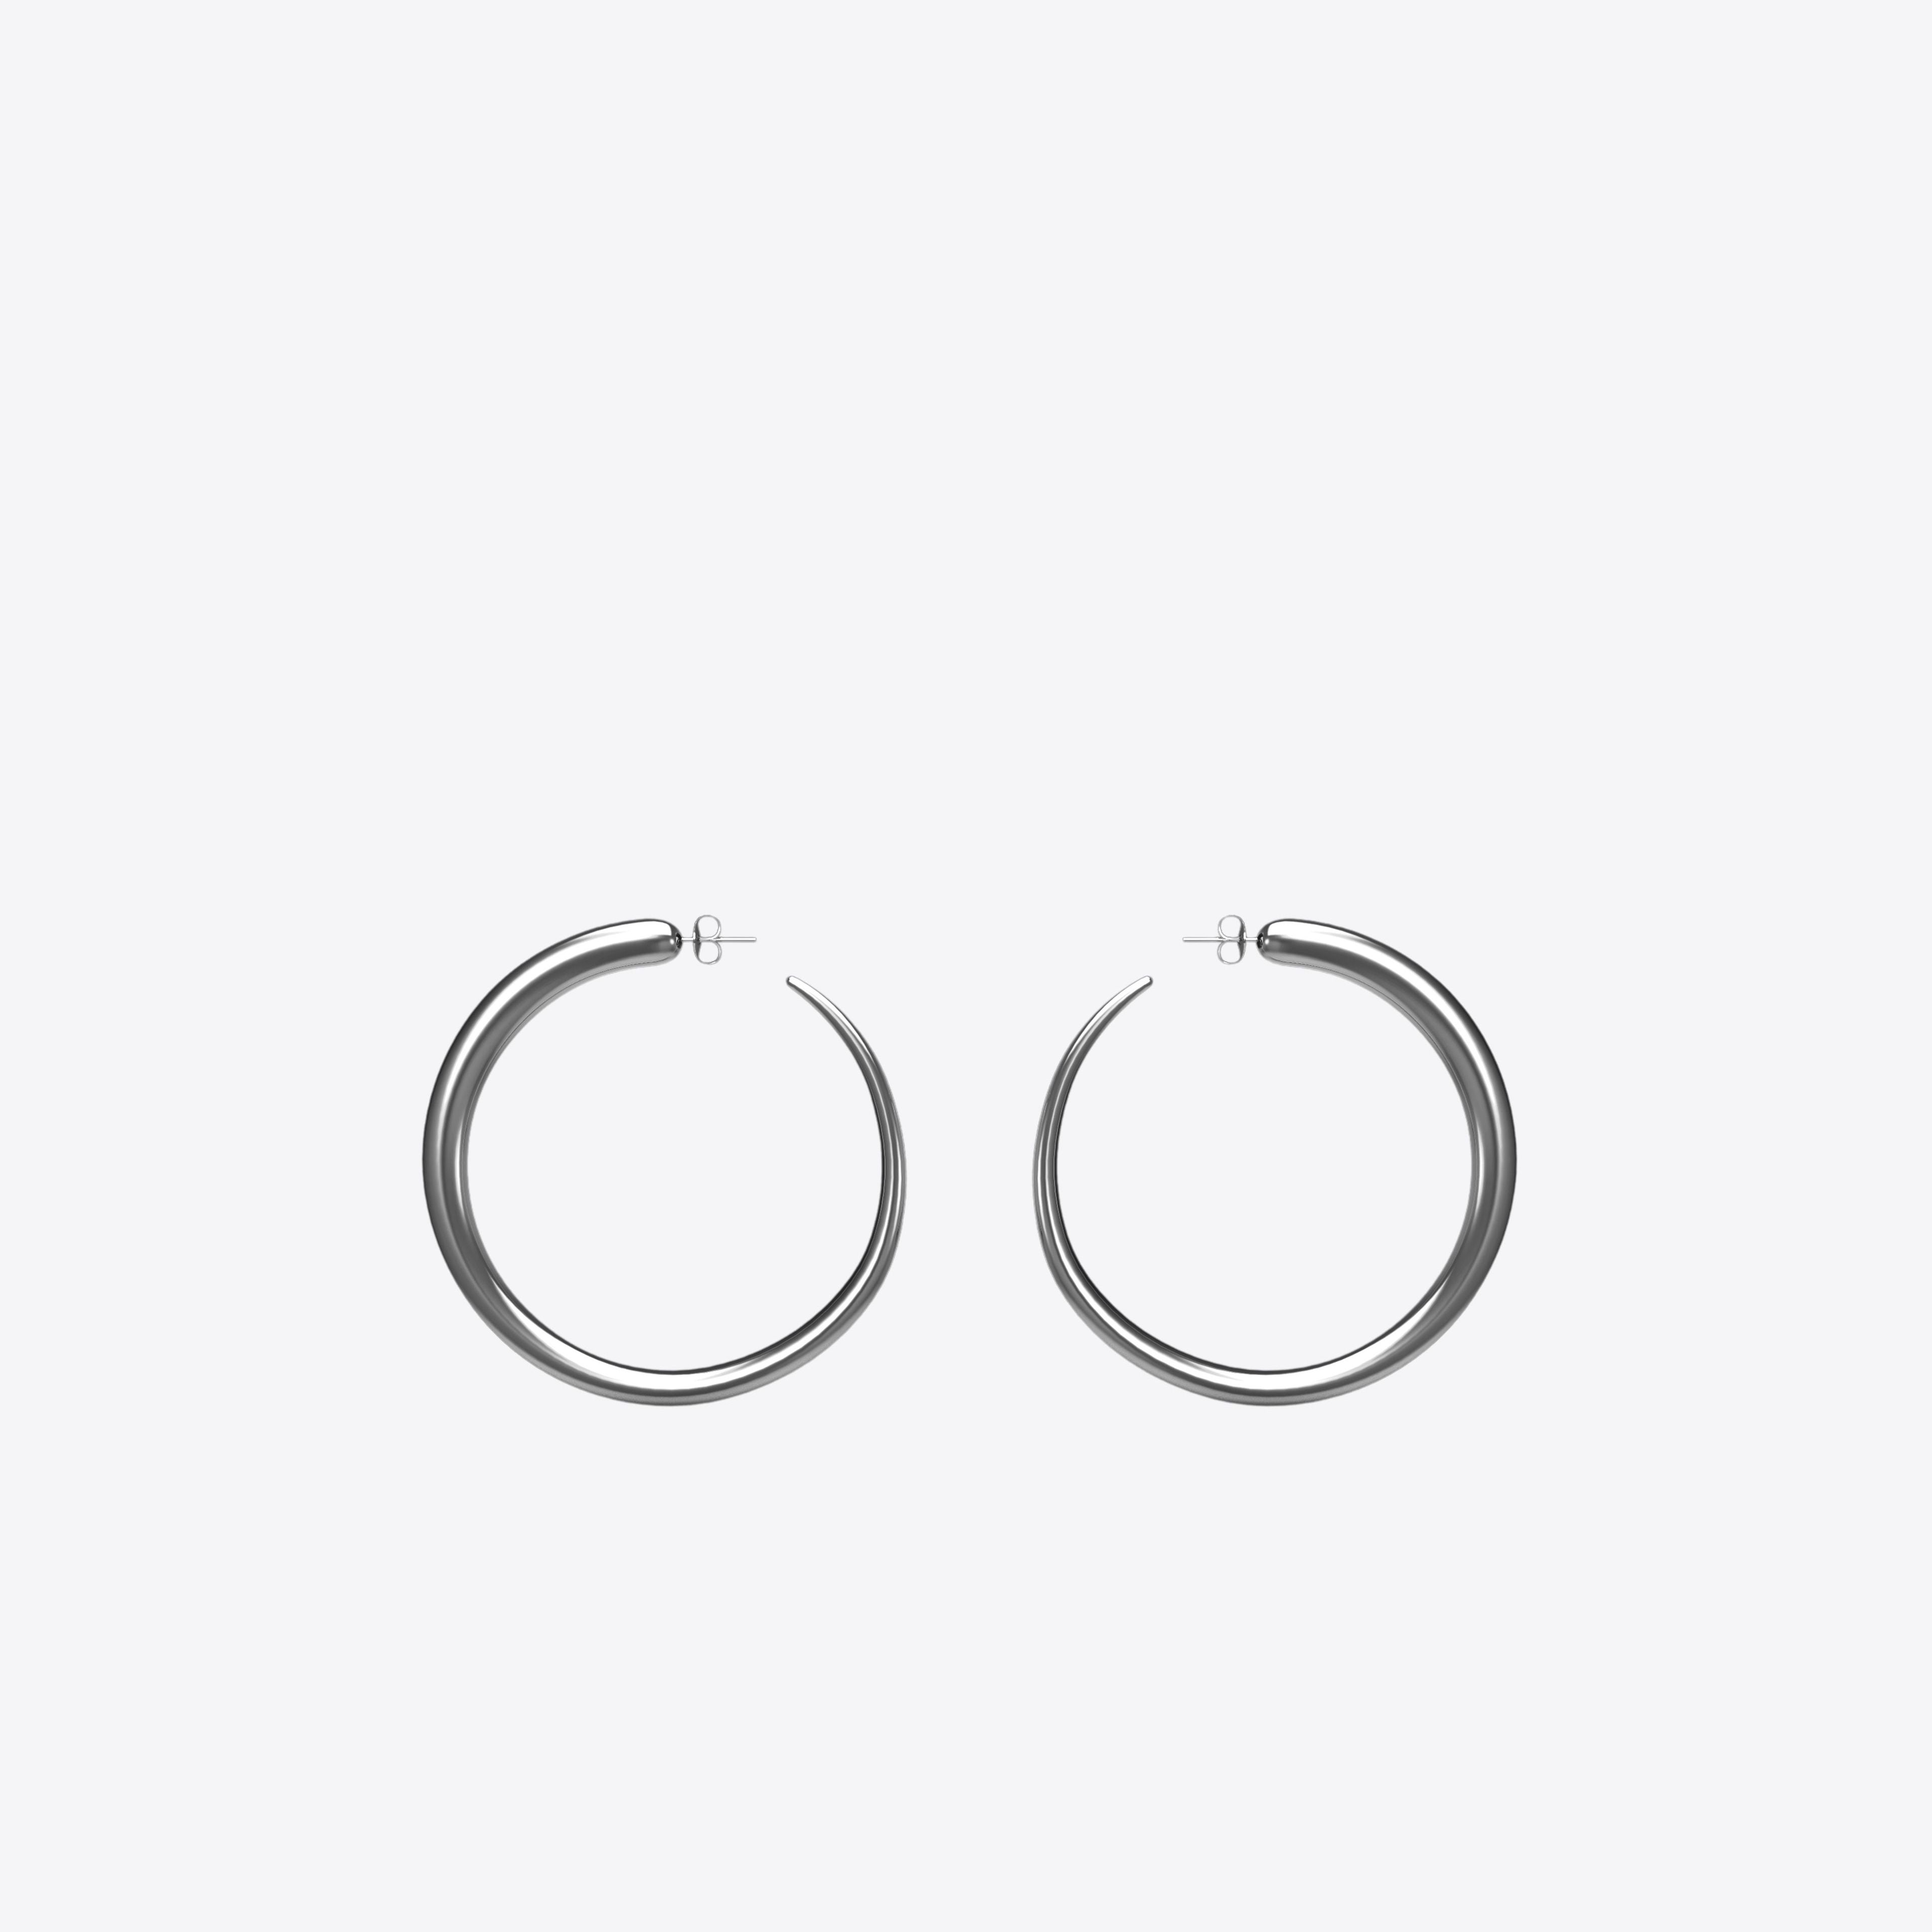 Khartoum Hoops Nude in Polished Sterling Silver